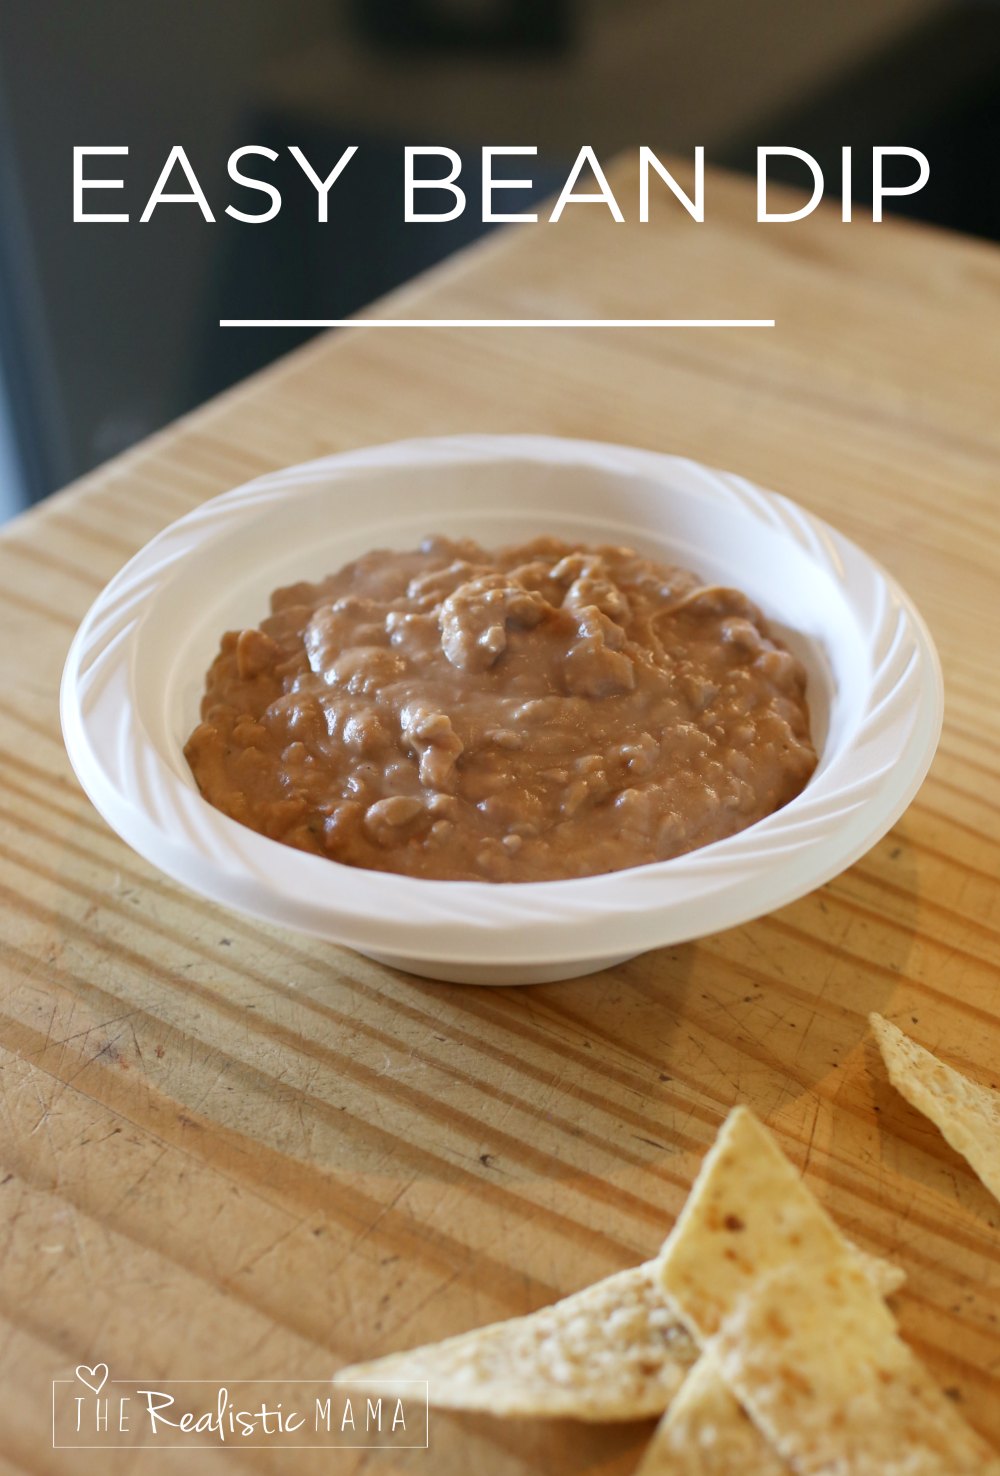 easy-bean-dip-made-this-tonight-took-less-than-20-minutes